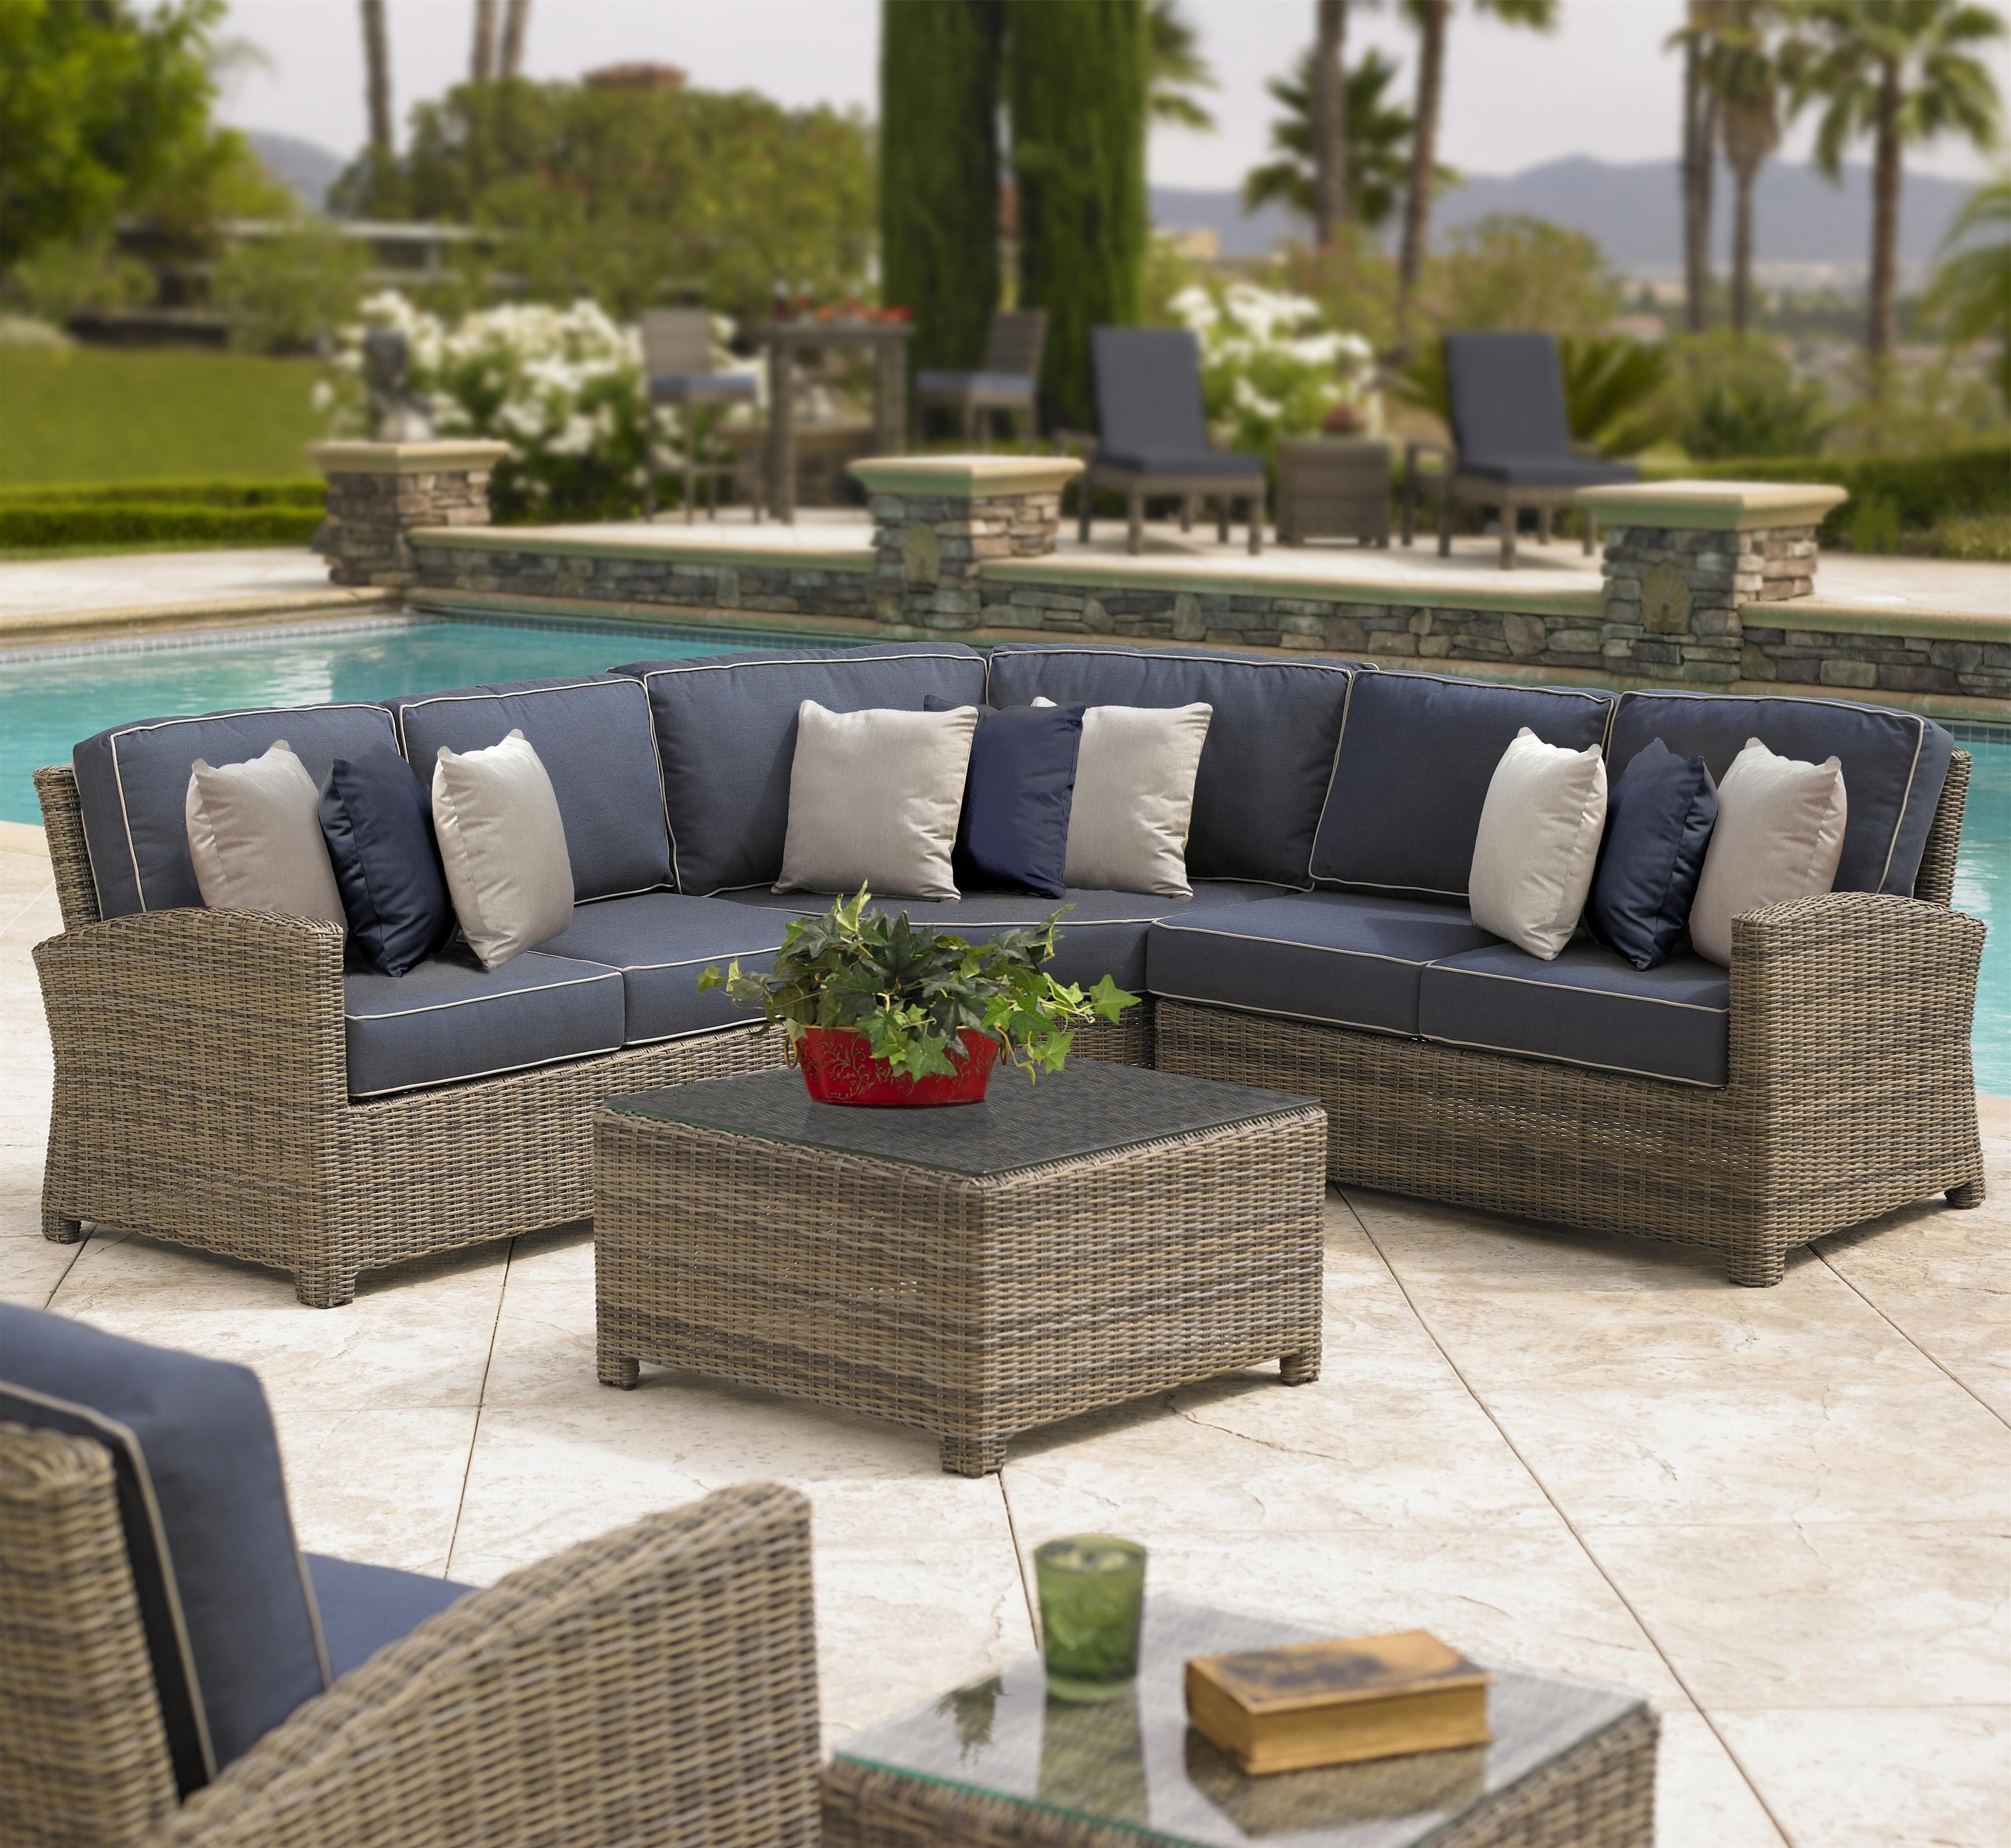 Most Recently Released Outdoor Room Edmonton Unique Sectional Patio Furniture Sale Elegant With Regard To Edmonton Patio Conversation Sets (View 3 of 20)